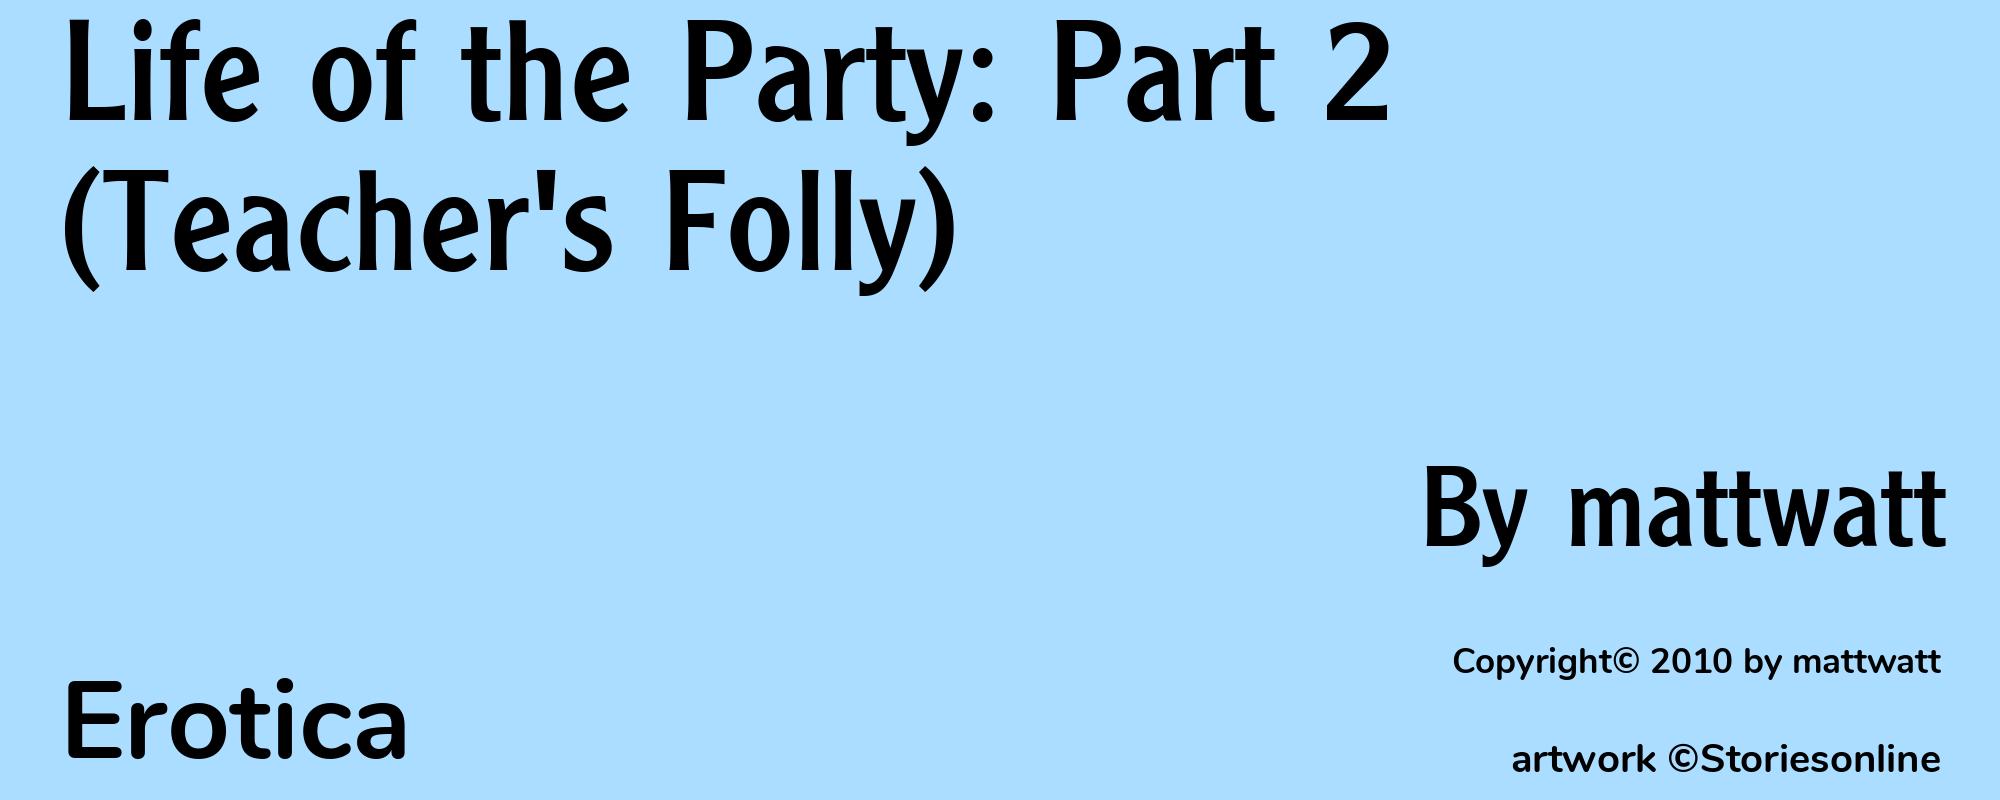 Life of the Party: Part 2 (Teacher's Folly) - Cover